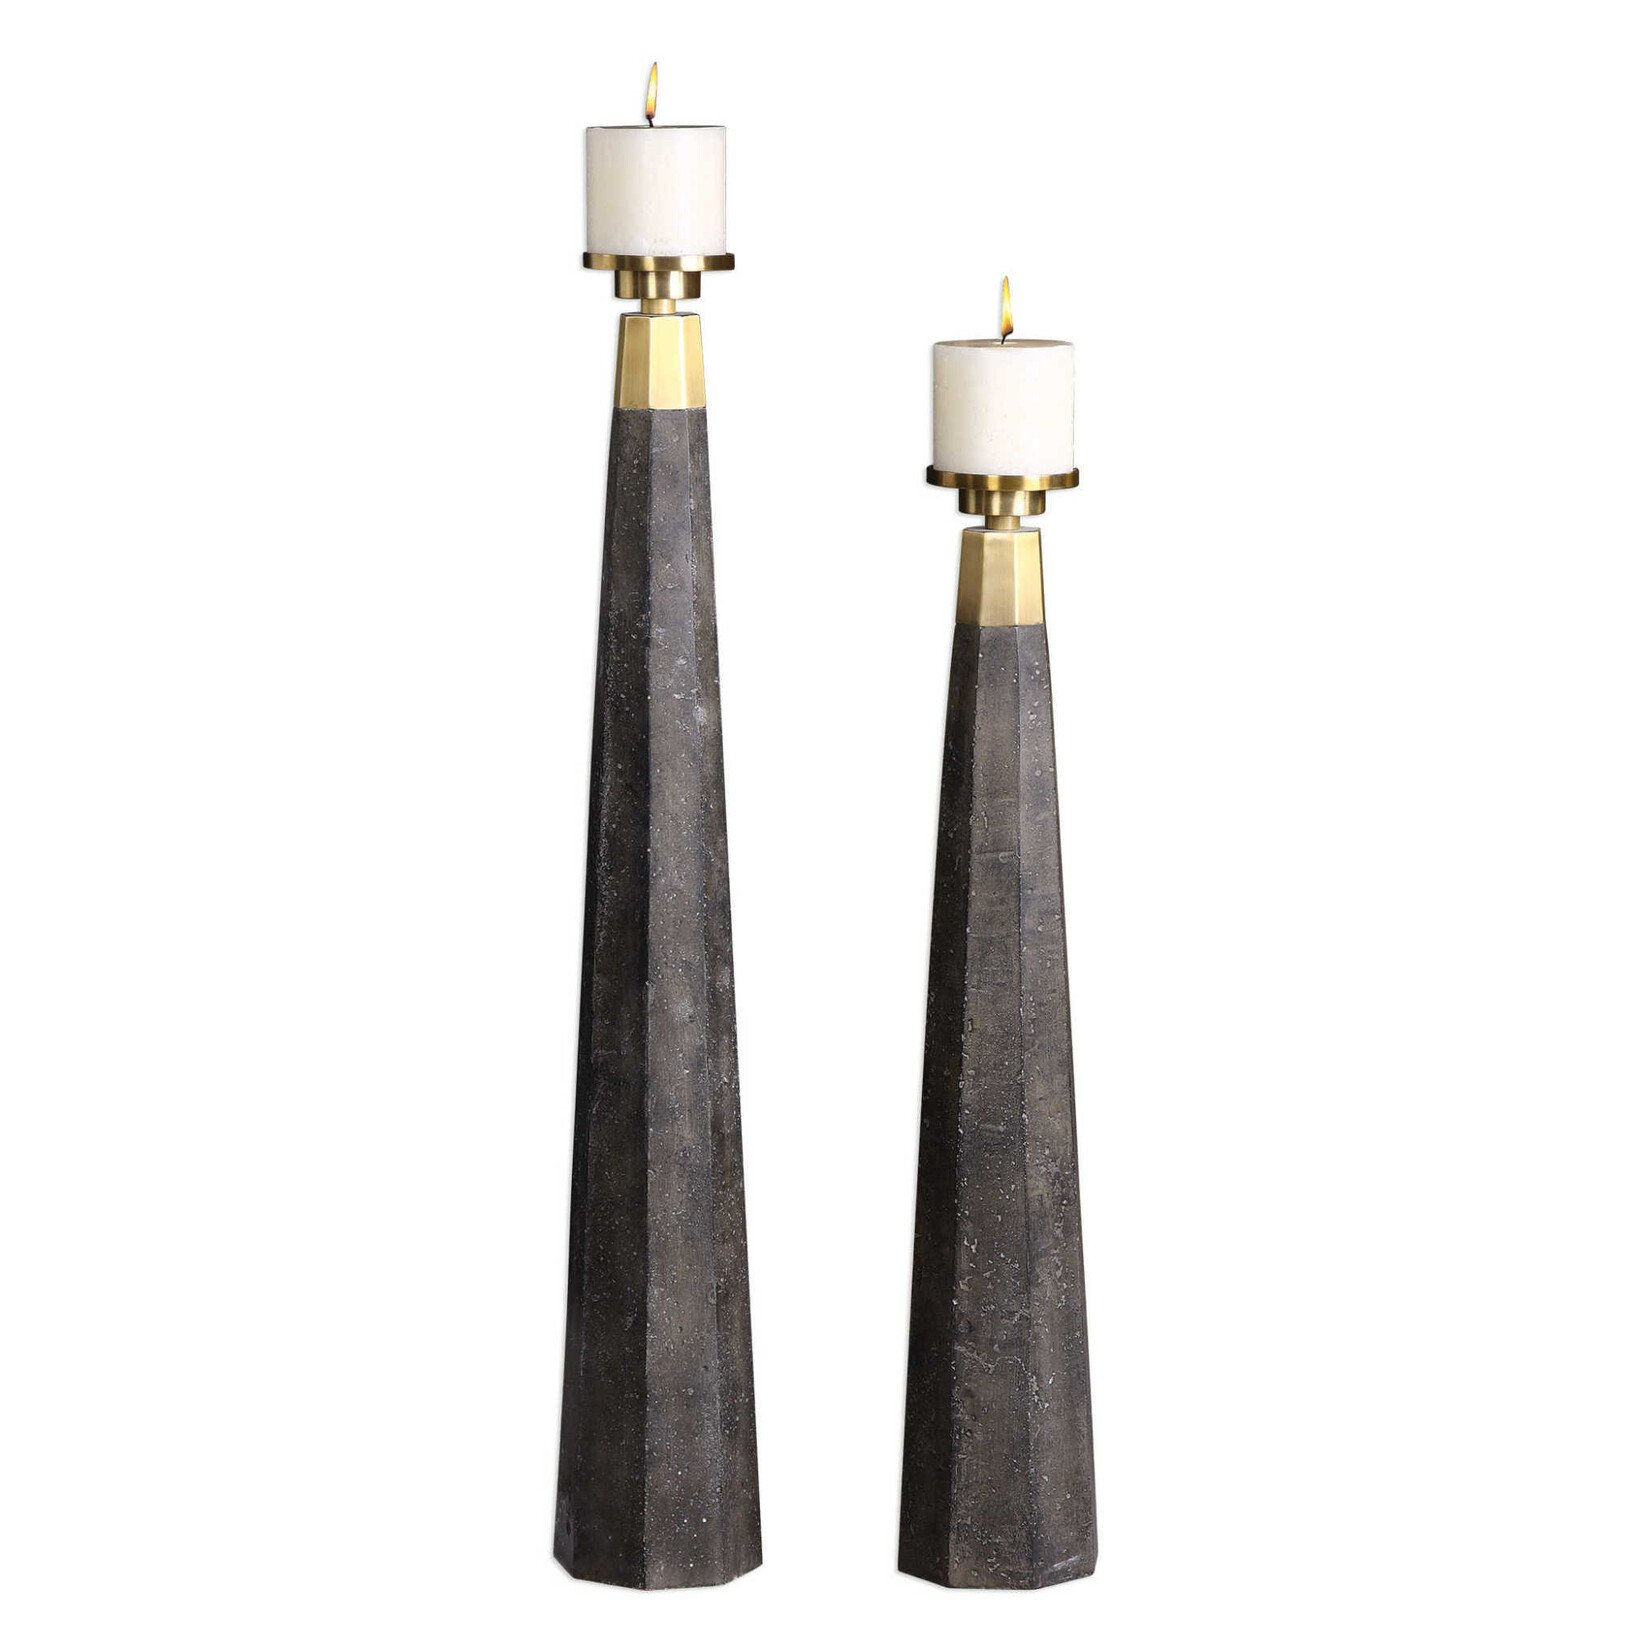 Uttermost / Revelation Pons Candleholder with Pillar Candle - Large 37.5" Includes candle